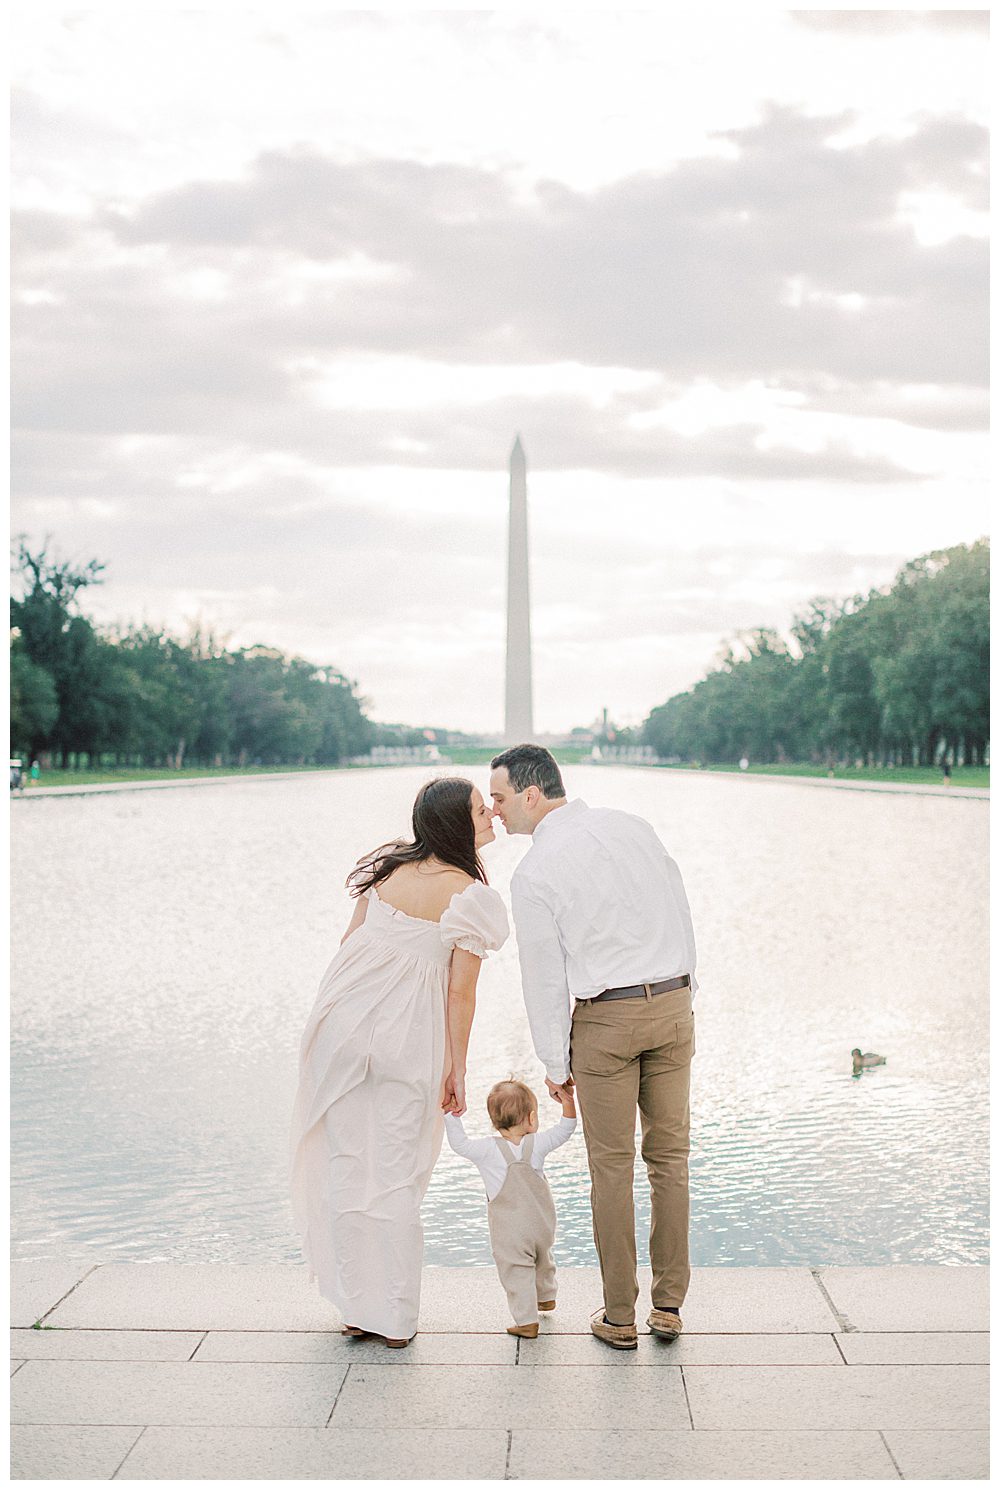 Mother and father lean in to kiss while holding their son's hand, standing in front of the Washington Monument and reflecting pool. 